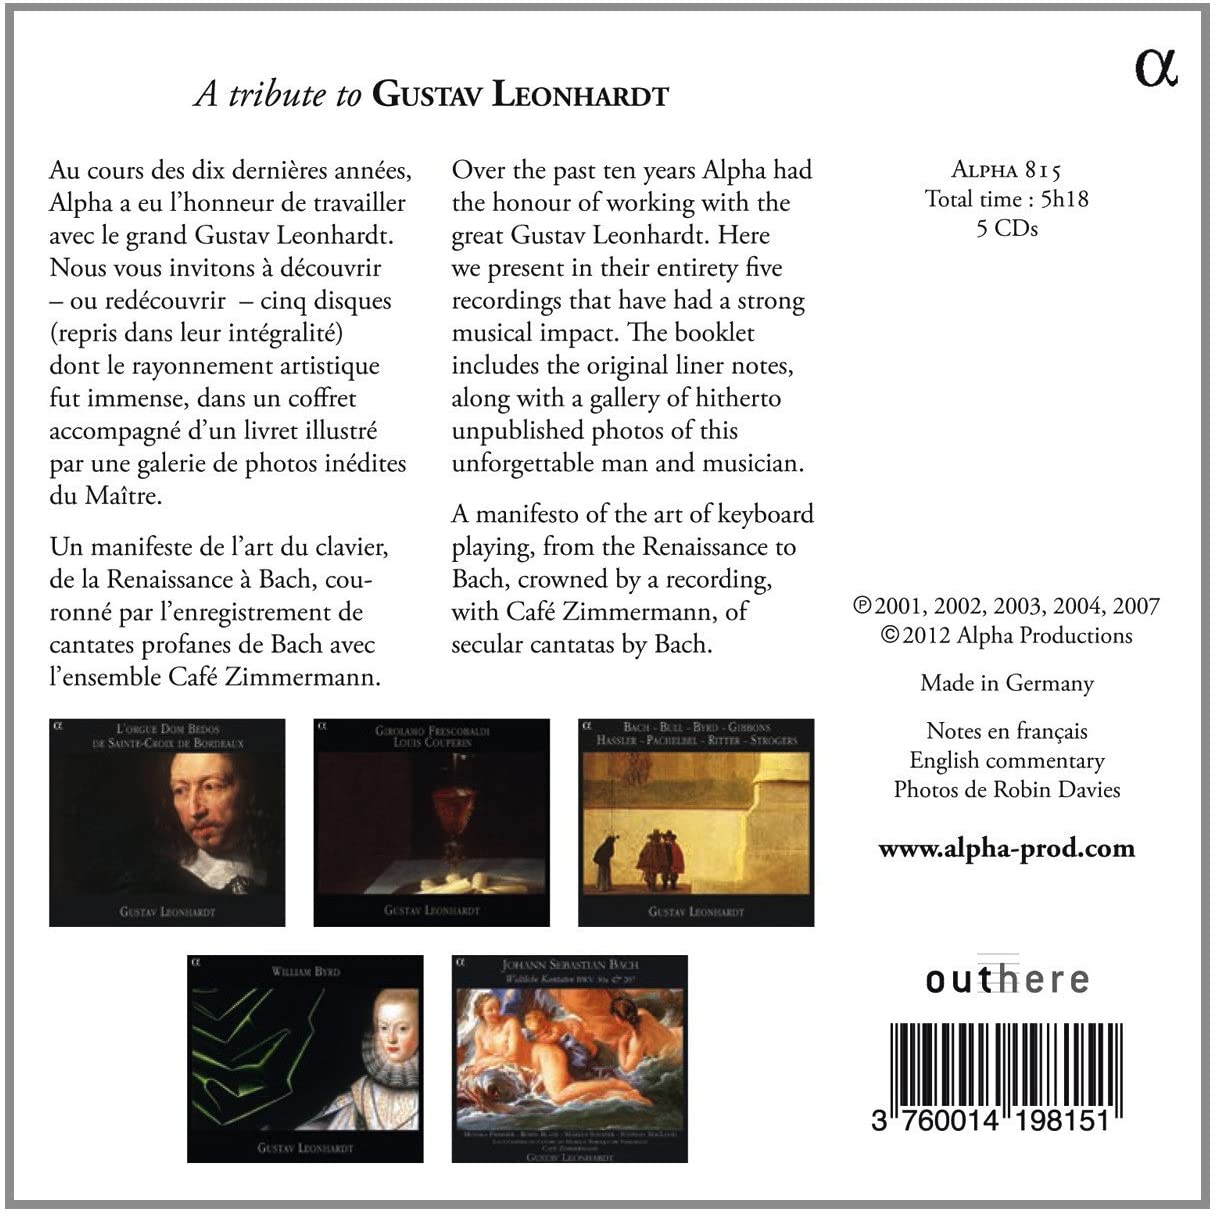 A tribute to Gustav Leonhardt, The last recordings: Byrd, Frescobaldi, L. Couperin, Marchand, Bach… - slide-1